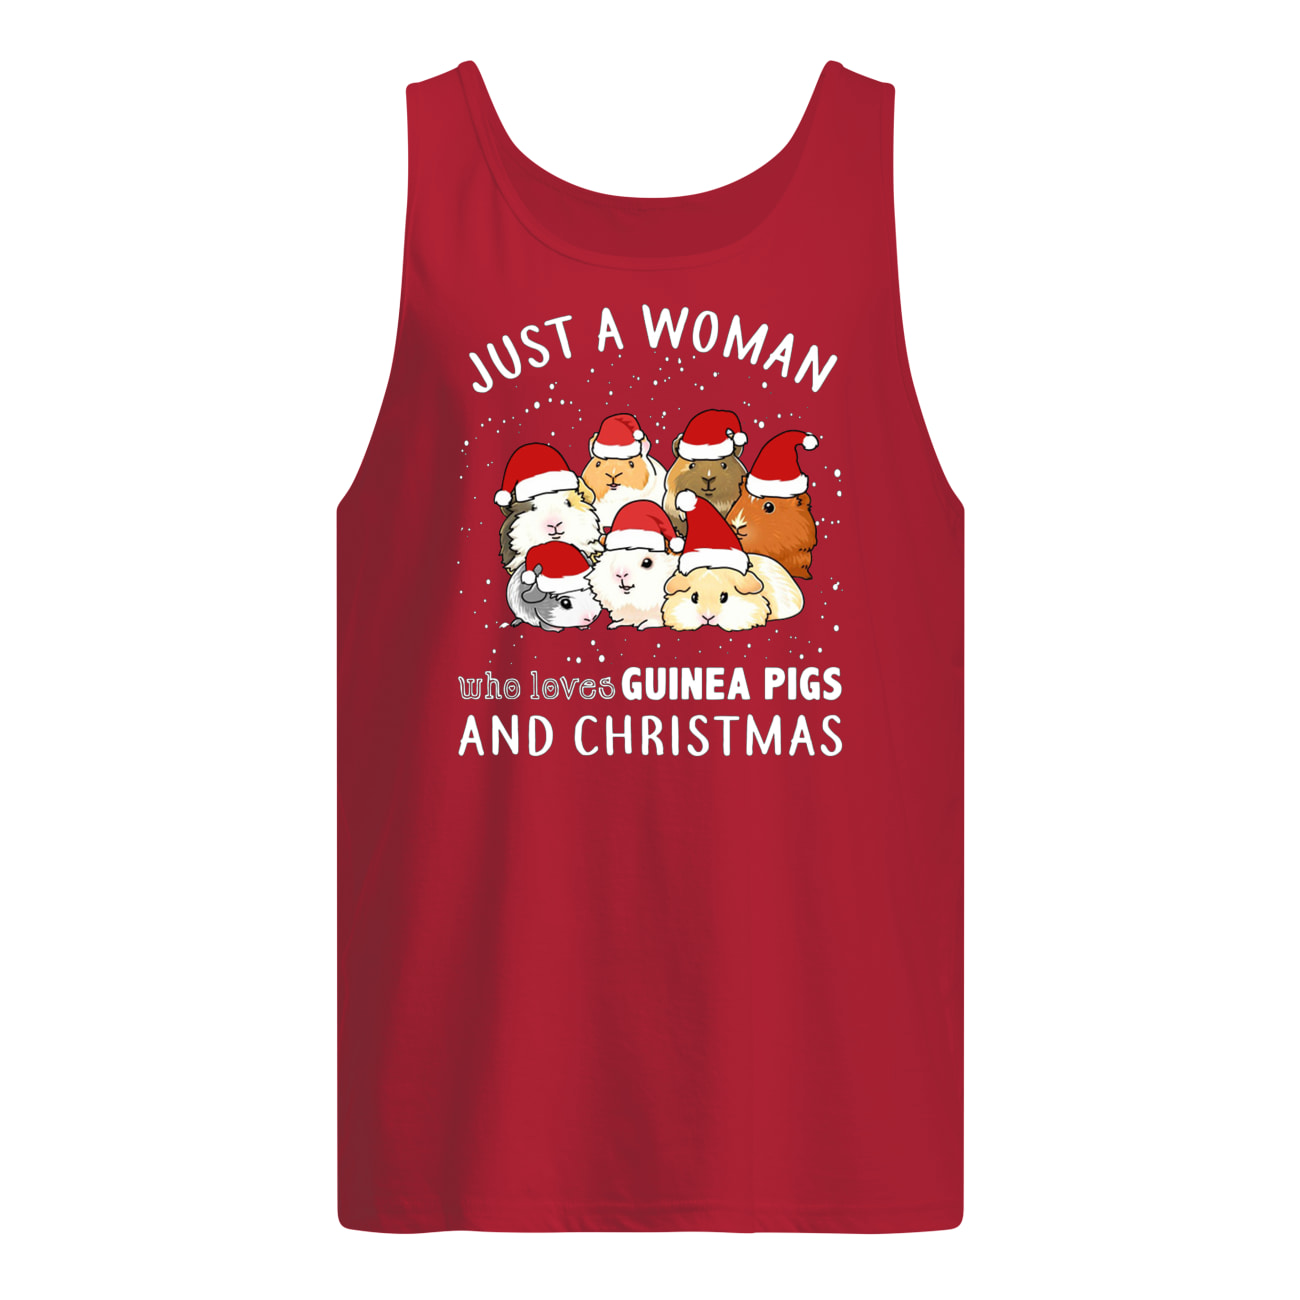 Just a woman who loves guinea pigs and christmas tank top